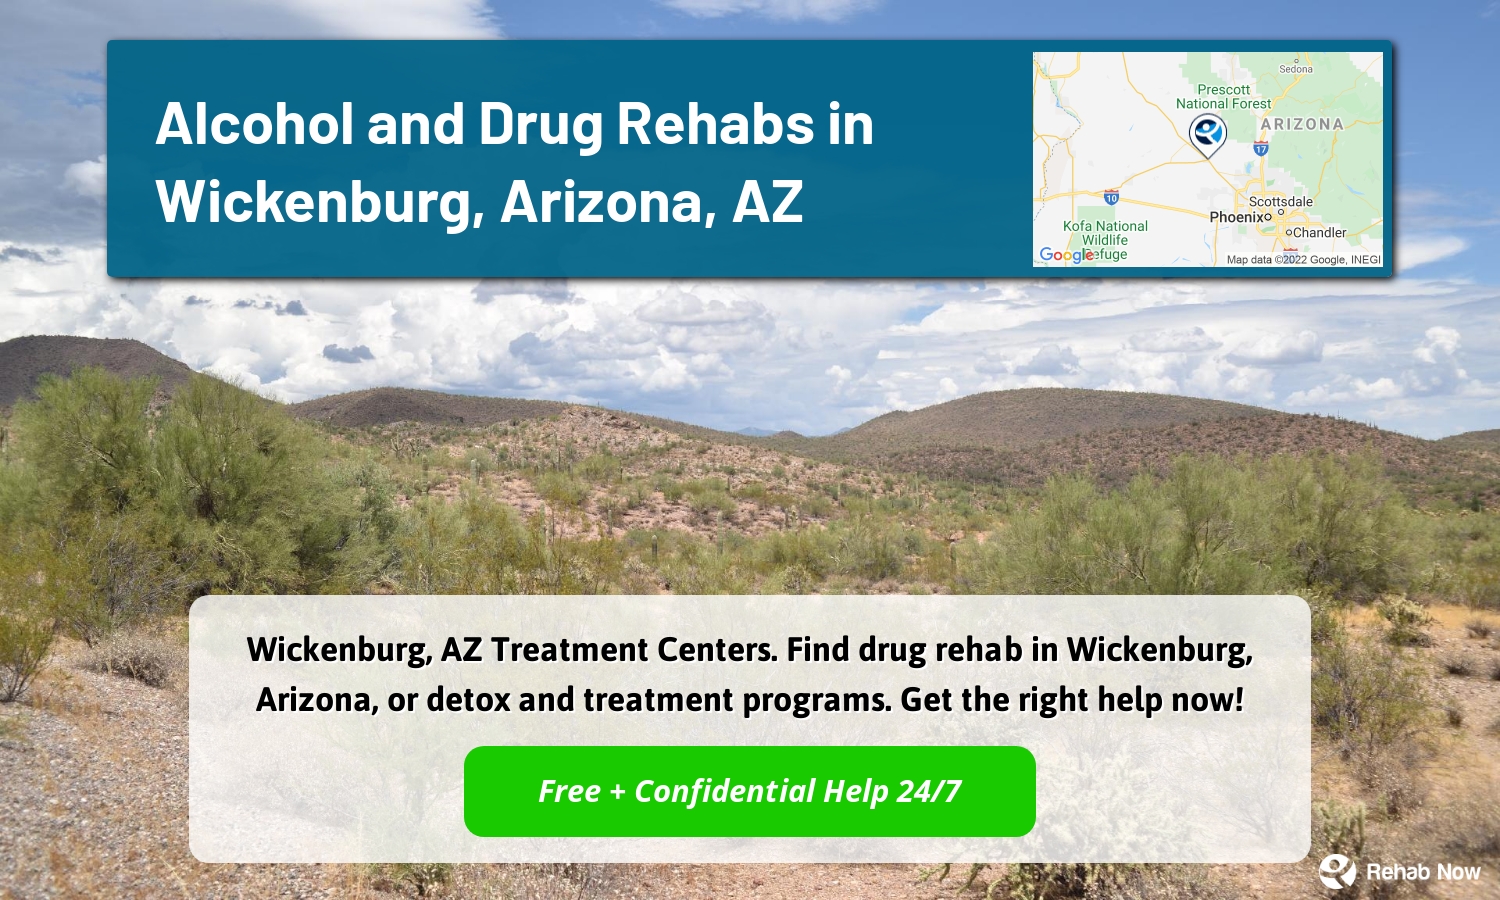 Wickenburg, AZ Treatment Centers. Find drug rehab in Wickenburg, Arizona, or detox and treatment programs. Get the right help now!